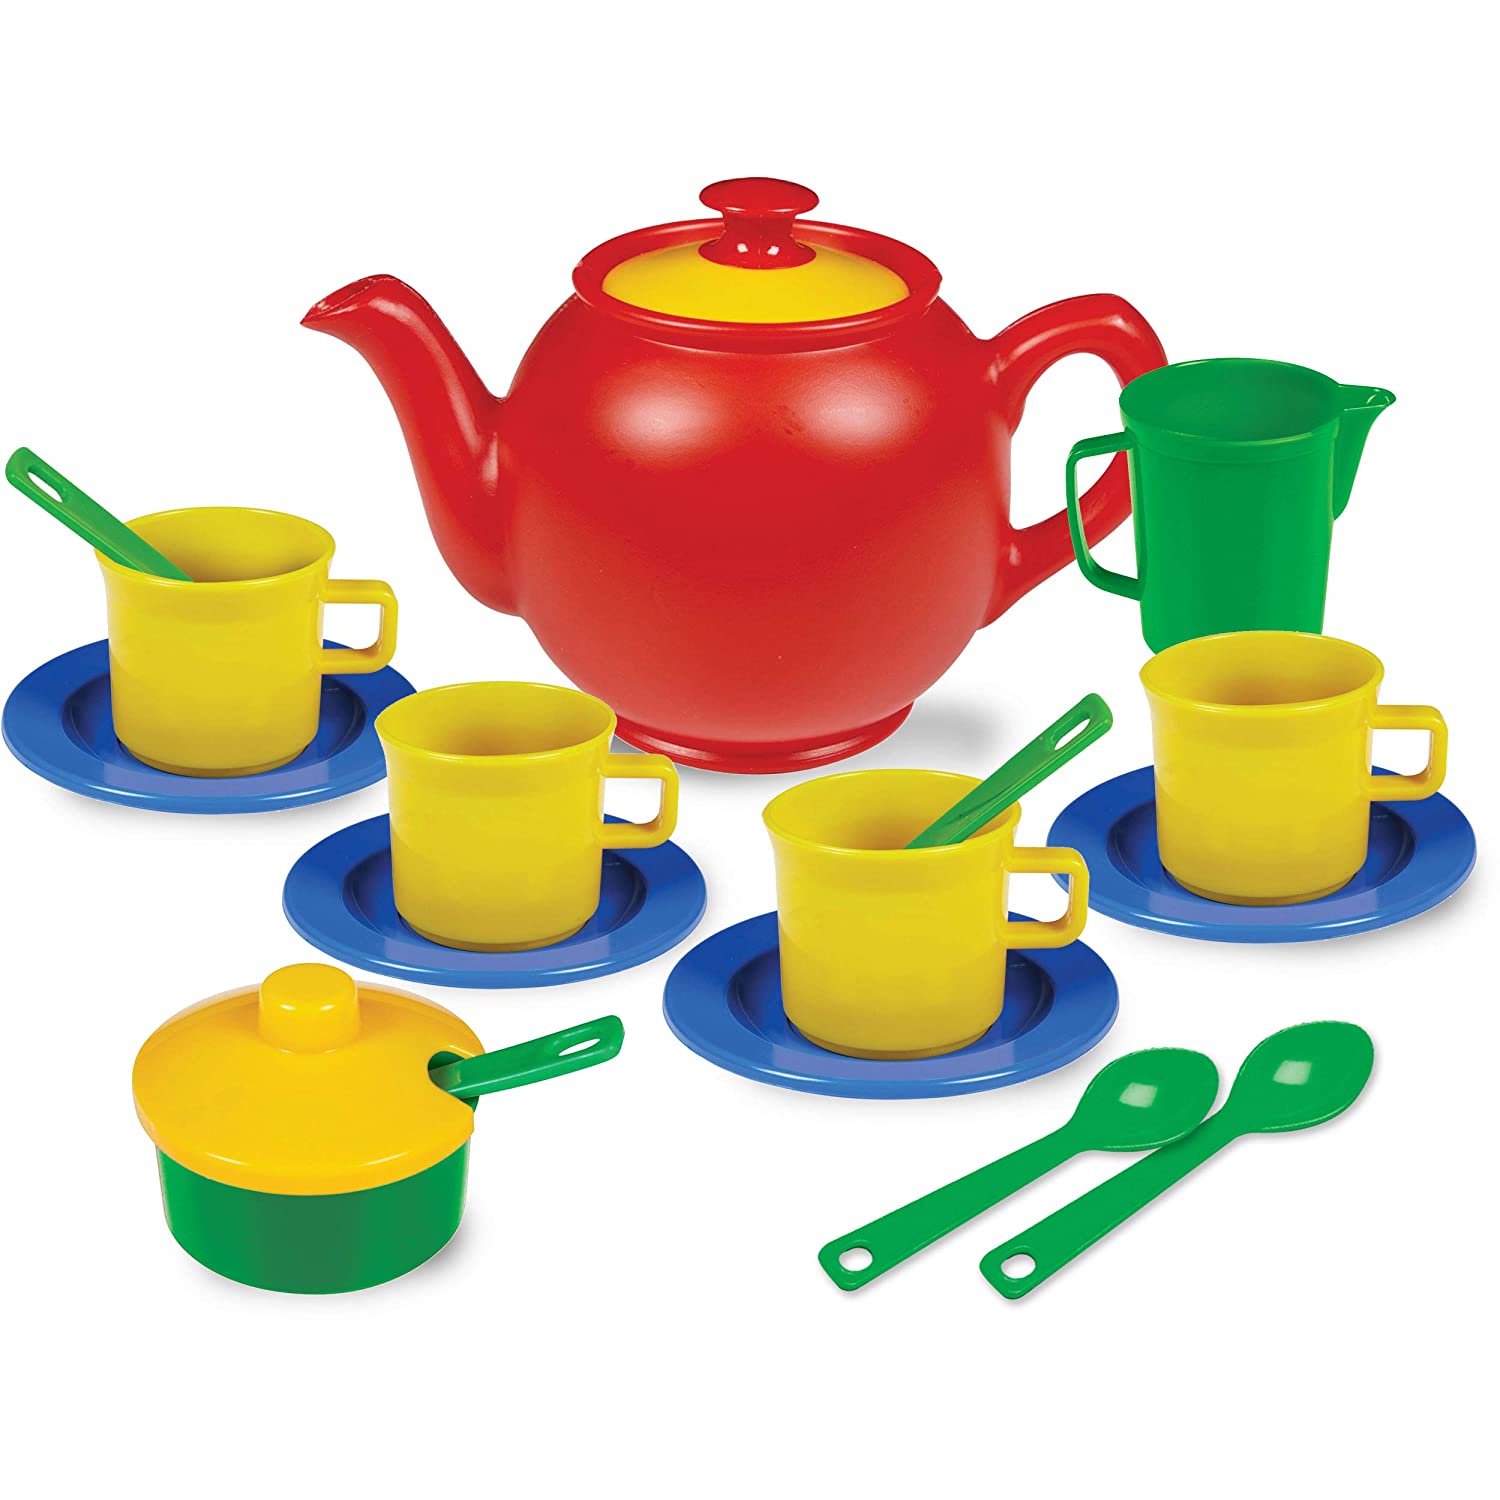 9 Best Kids Tea Sets 2022 - Buying Guide & Reviews 6